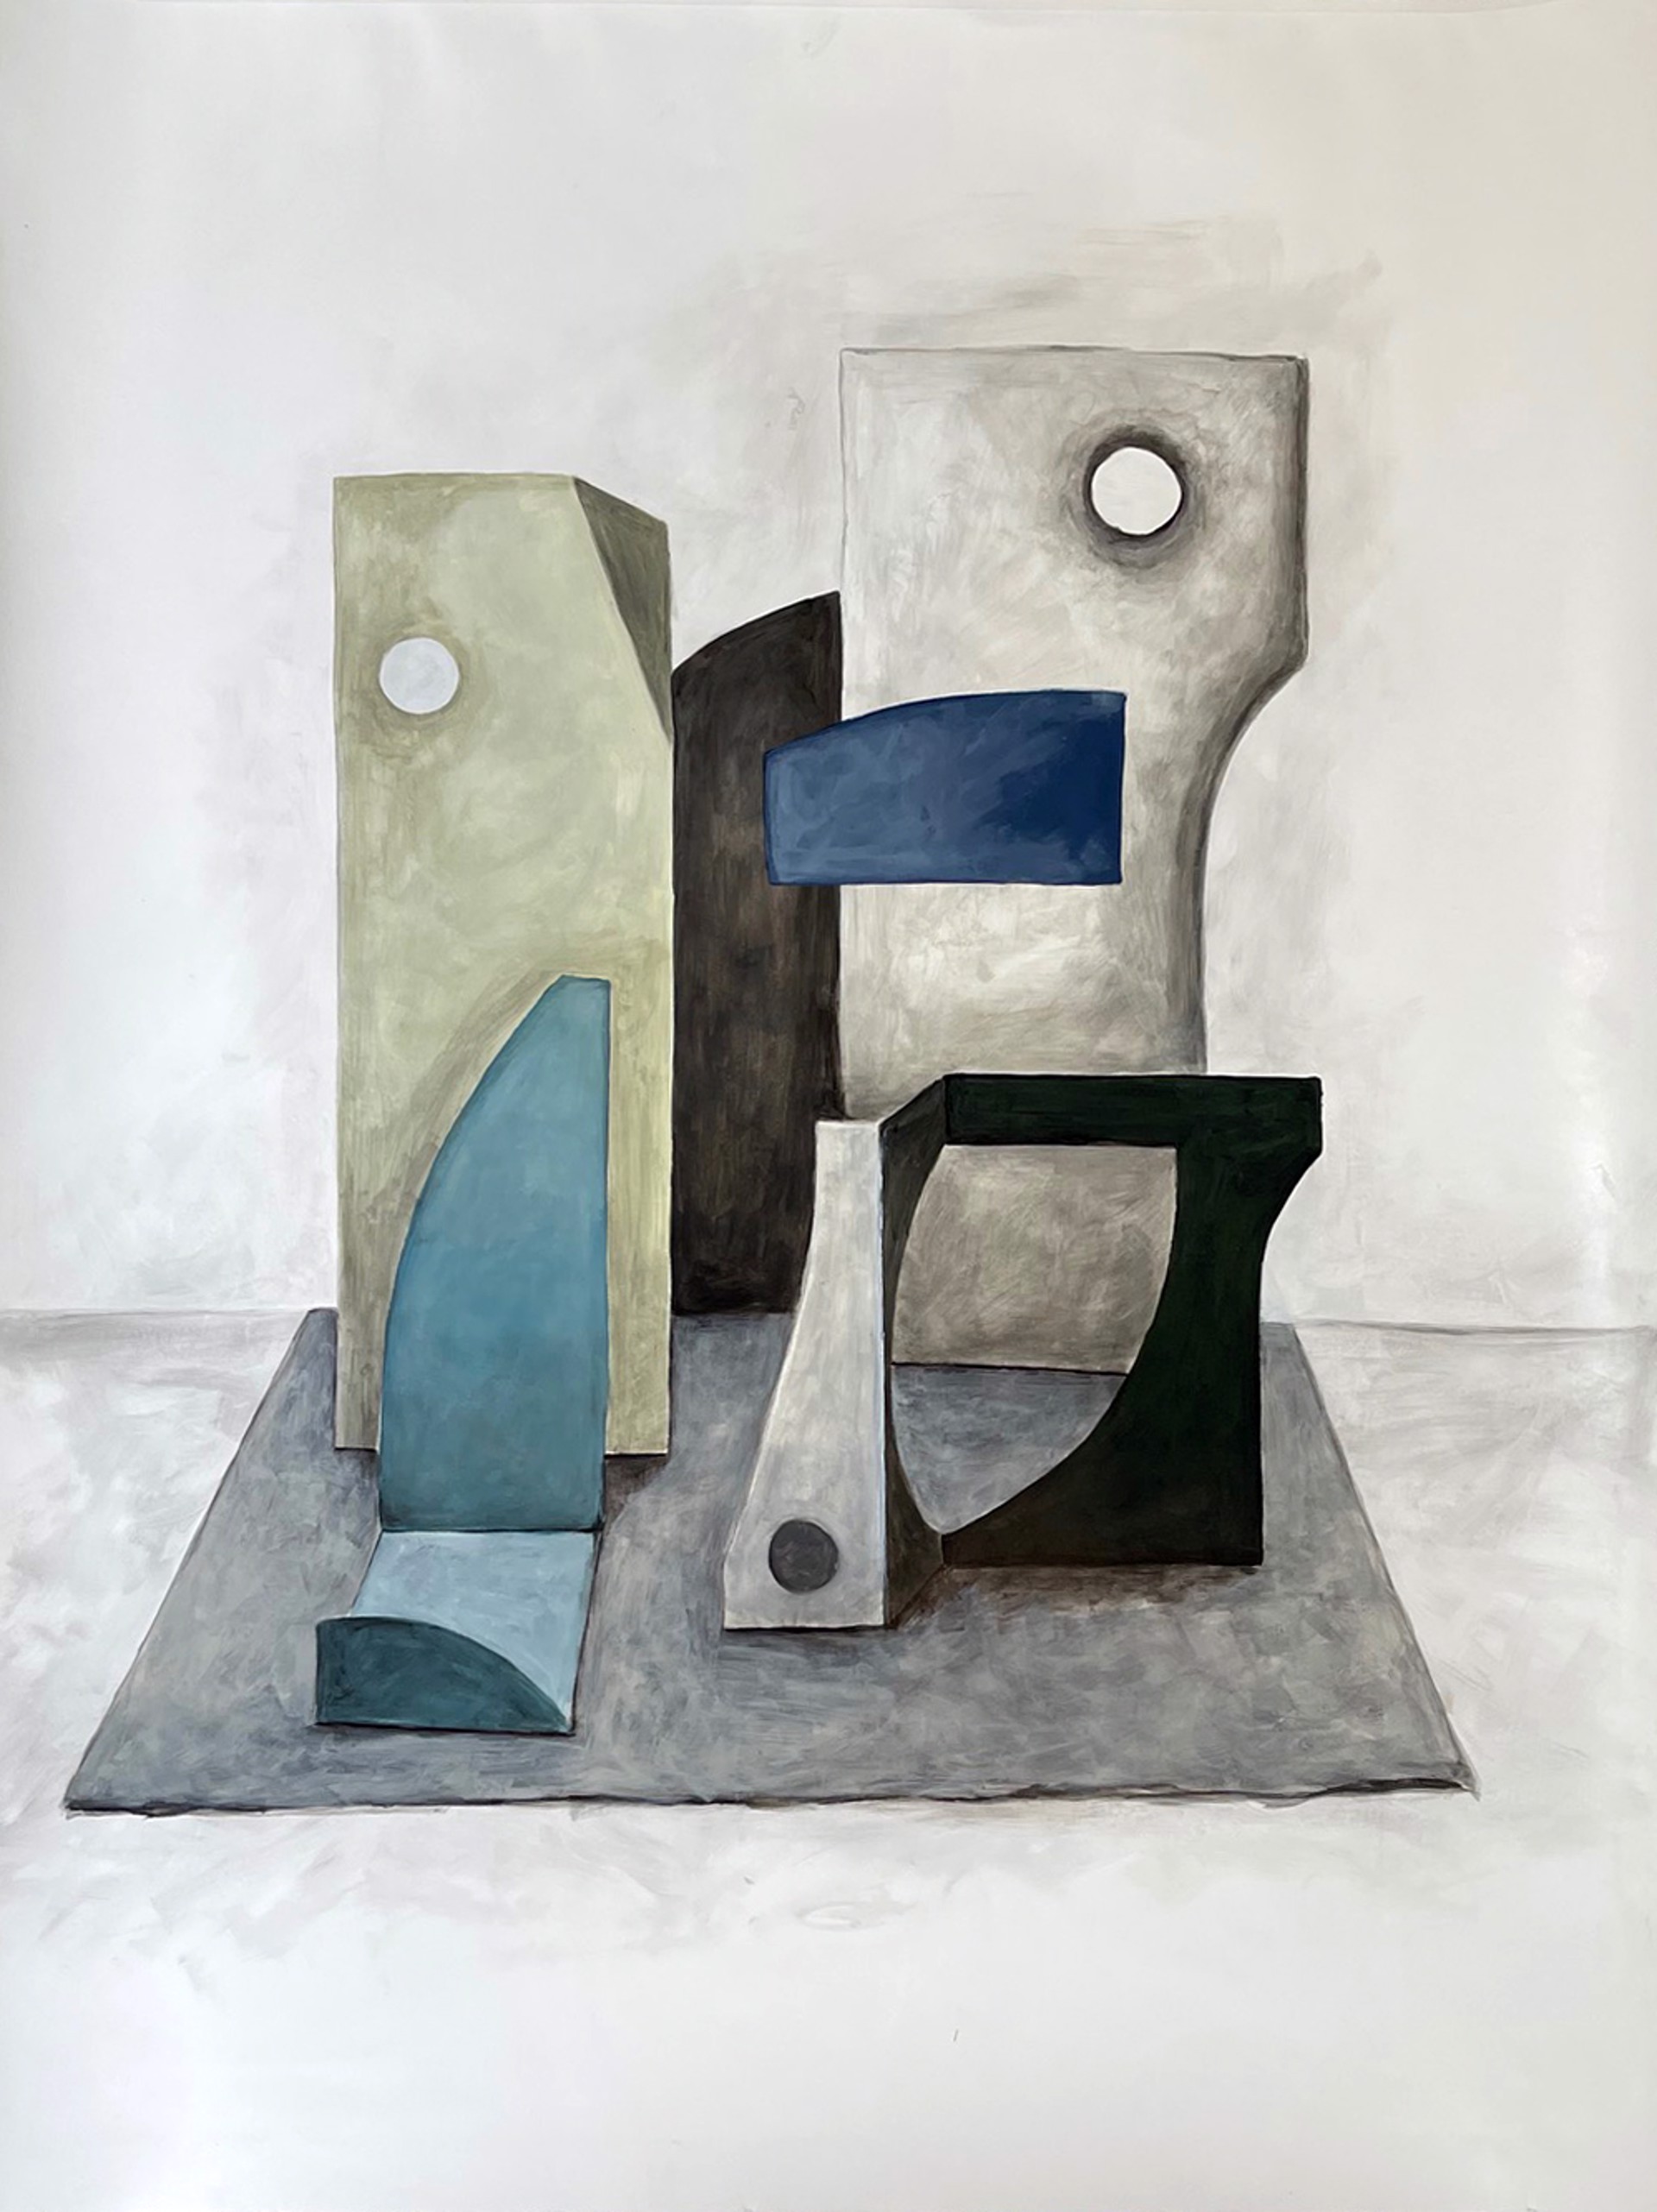 The Leroy Project - Cubism Series by Leroy Dewees